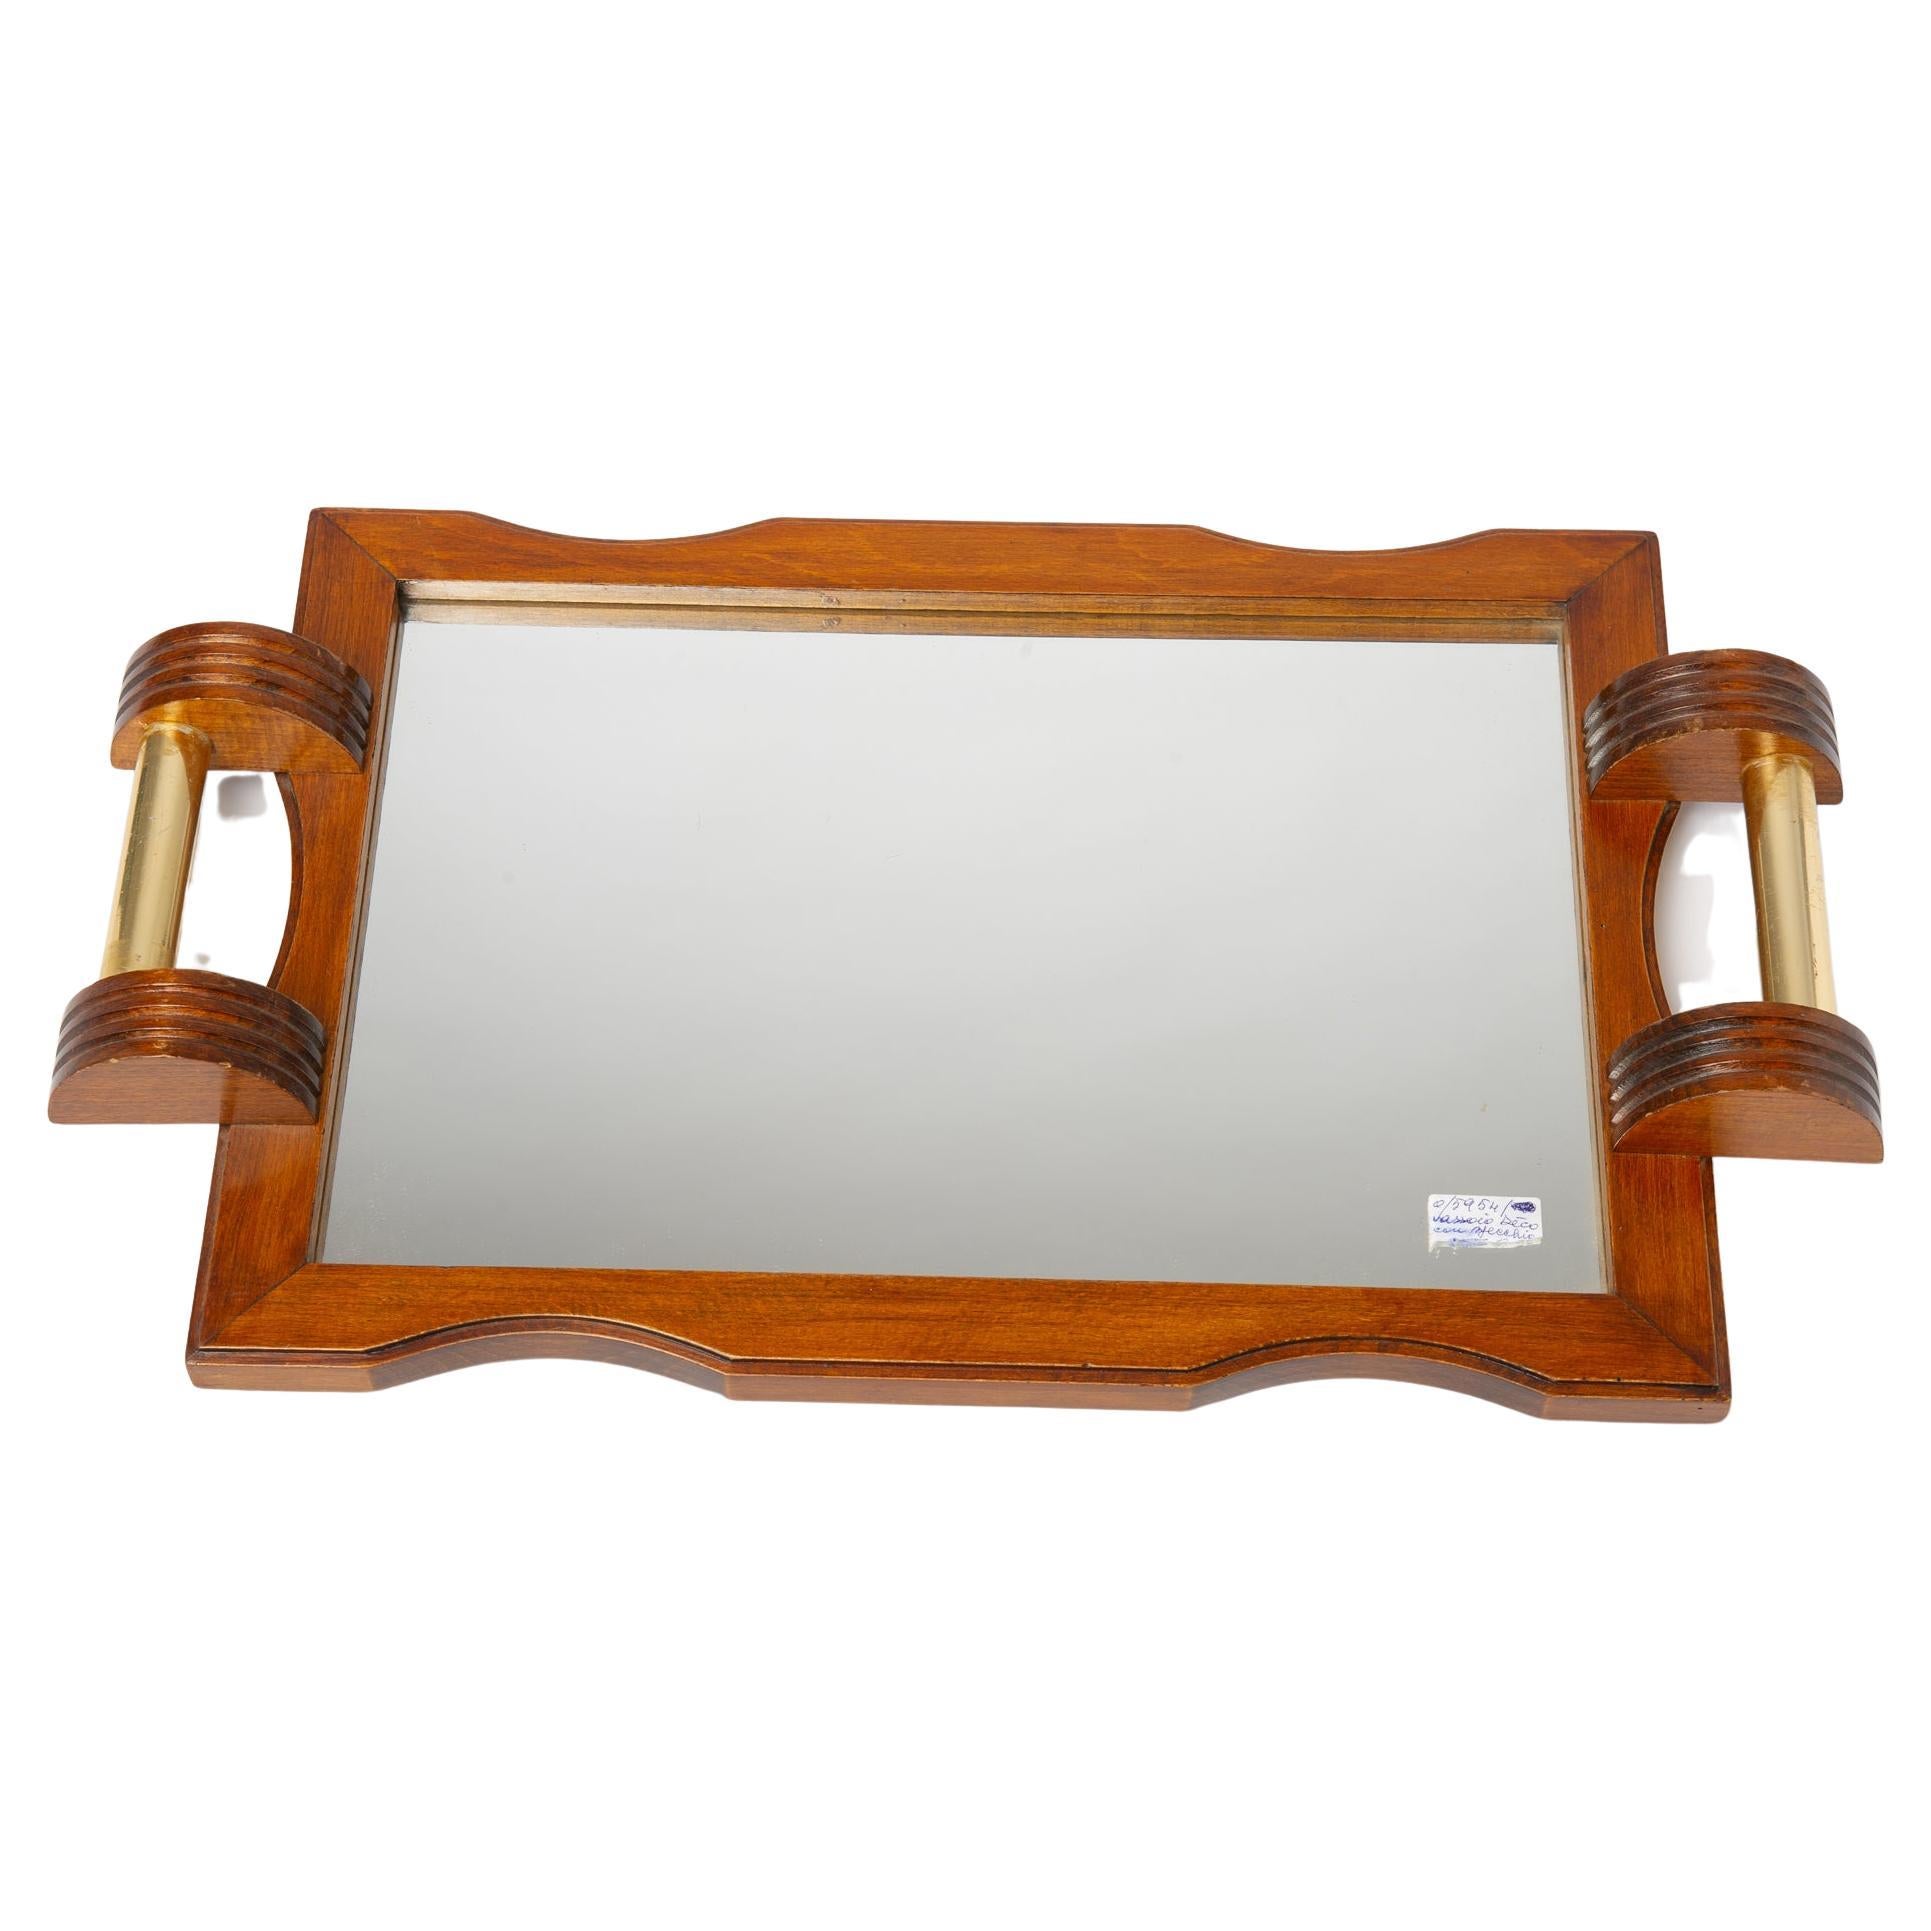 Déco Tray in Wood with Mirror